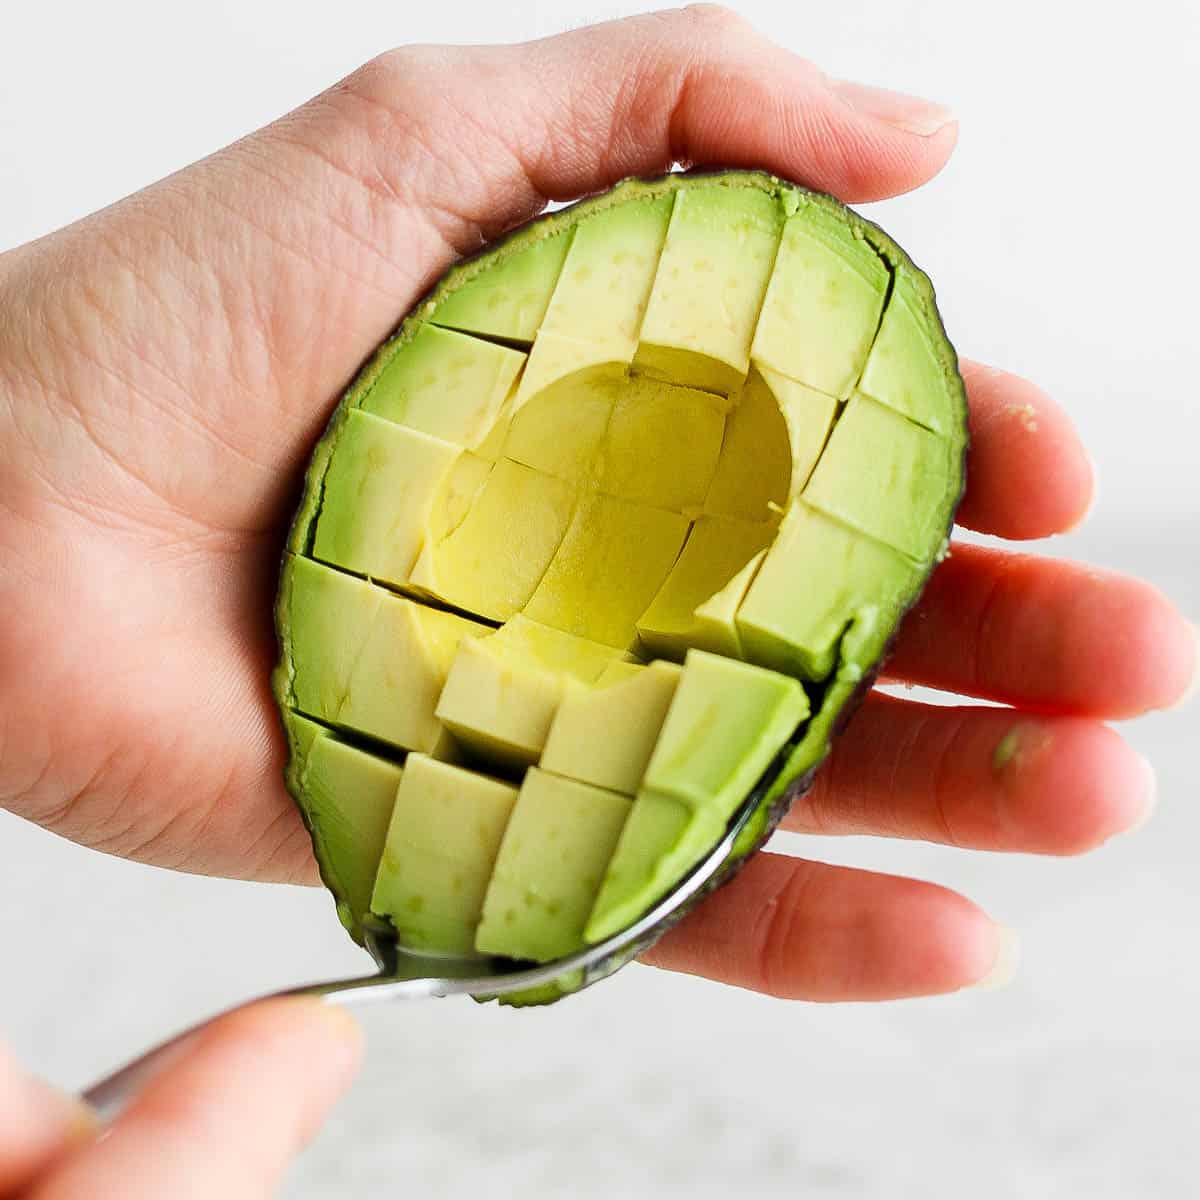 https://thewoodenskillet.com/wp-content/uploads/2023/02/how-to-cut-an-avocado-tutorial-1.jpg